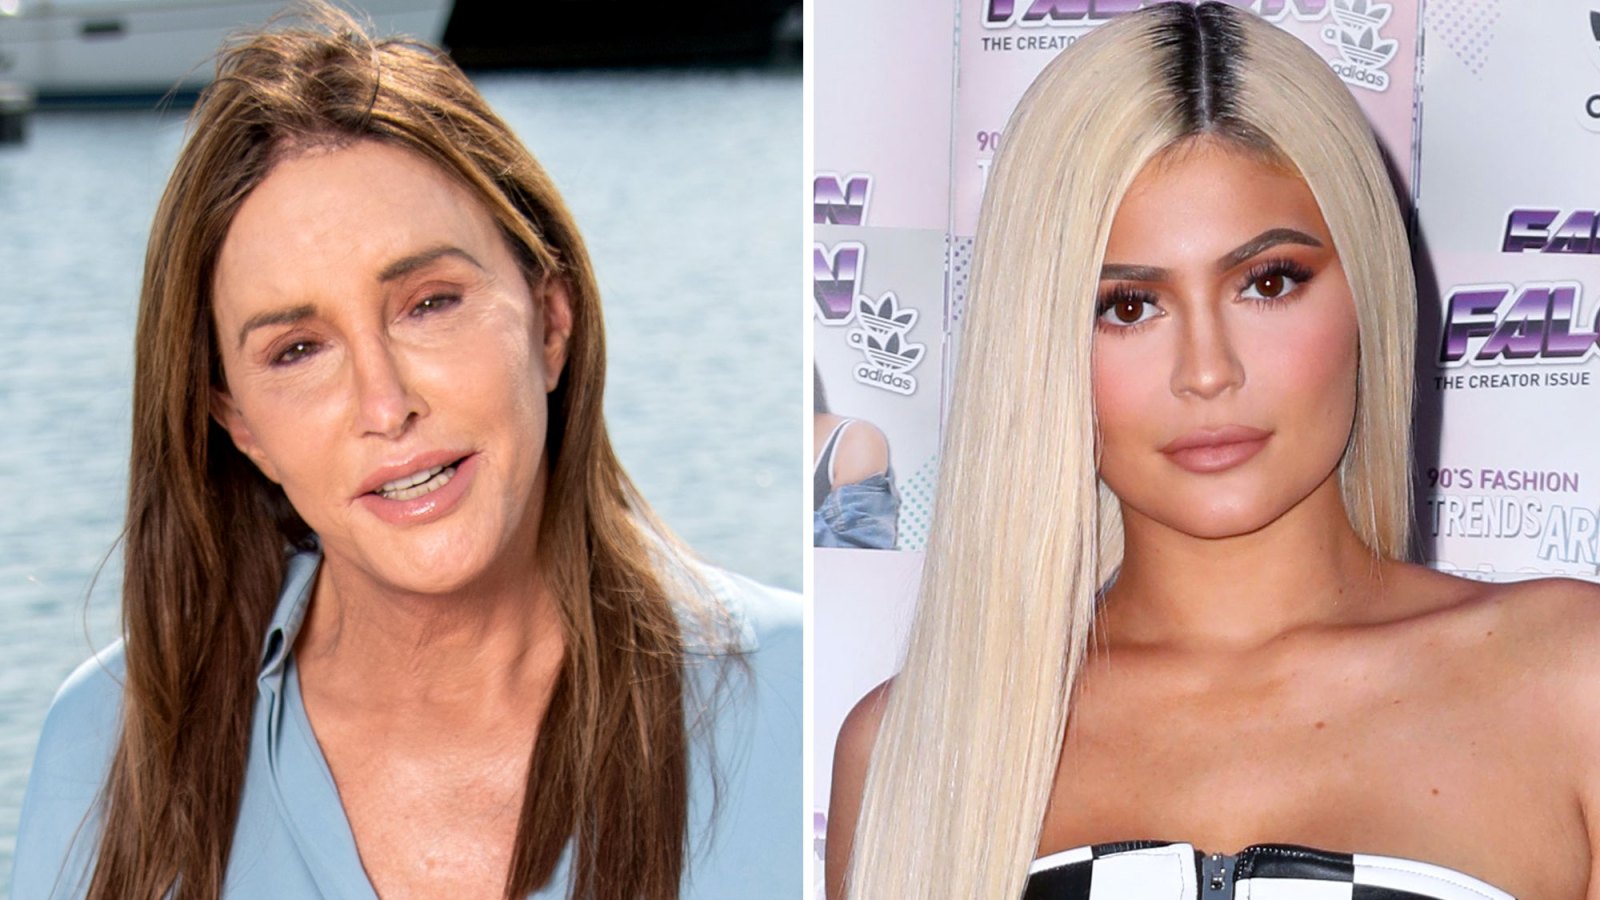 Kylie Jenner Spends ‘$300,000 to $400,000’ a Month on Security, Caitlyn Jenner Says